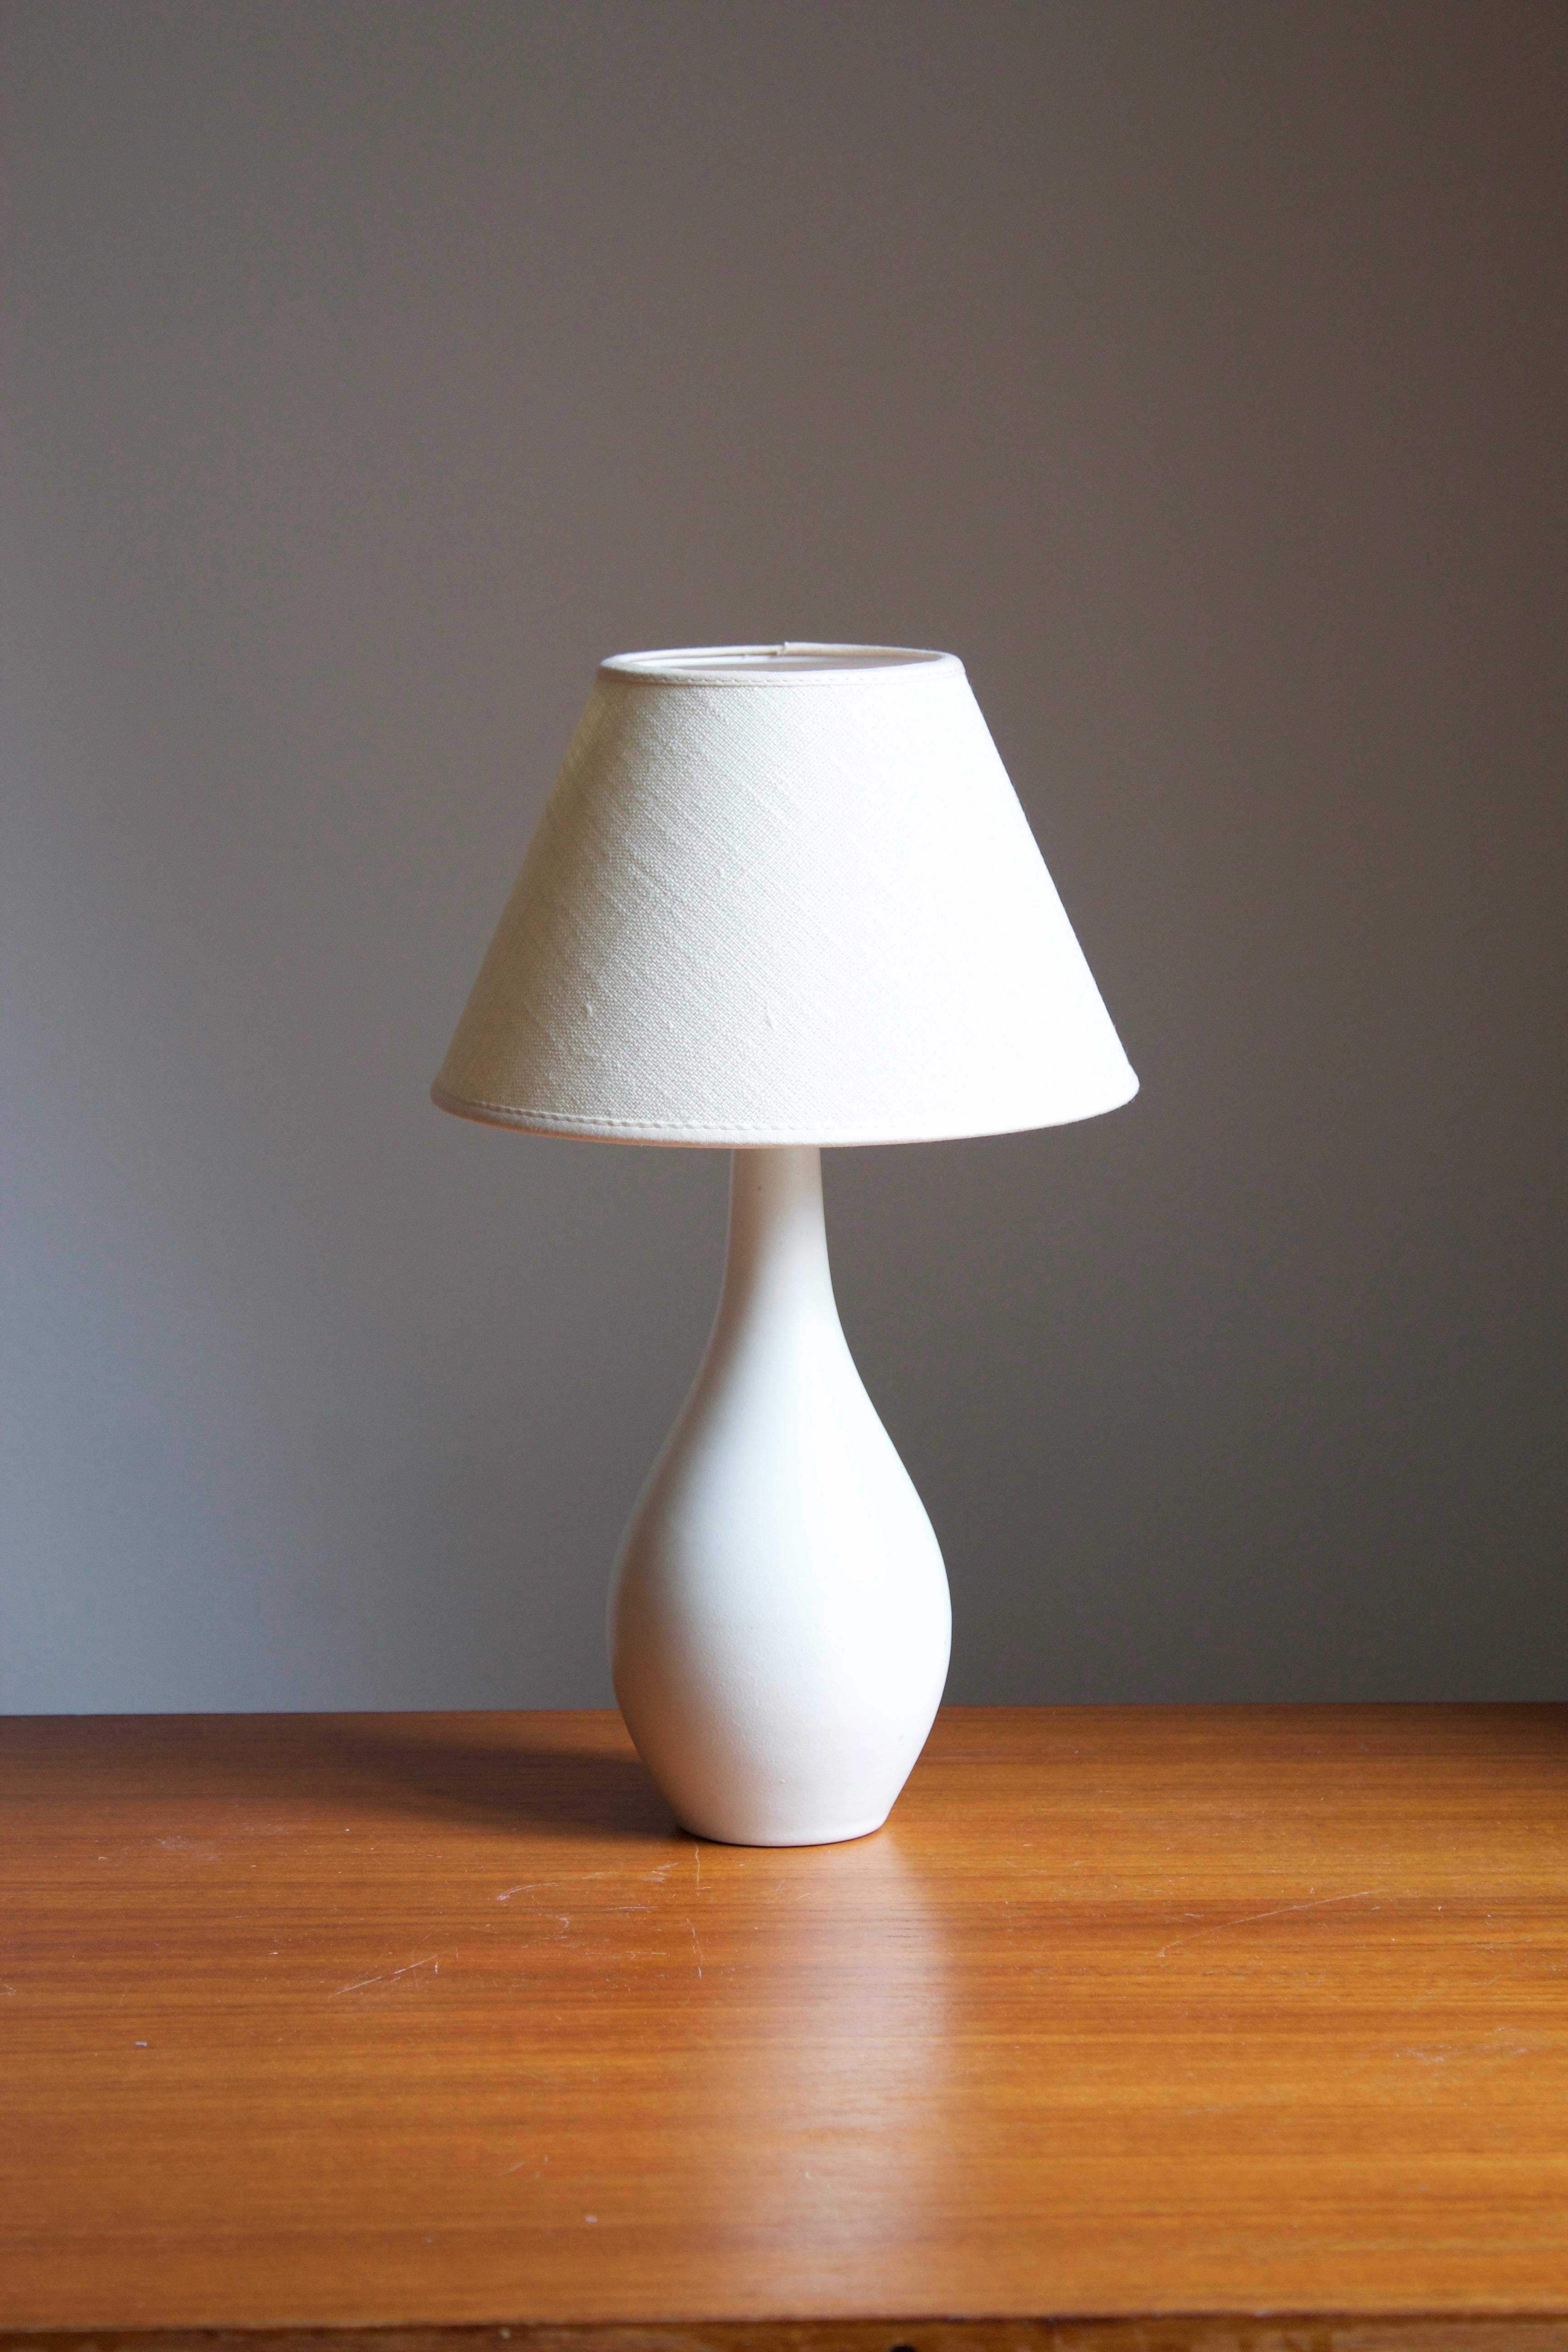 A produced by Nittsjö, Sweden, 1930s.

Stated dimensions exclude the lampshade. Sold without lampshade.

Glaze features a white color.

Other designers of the period include Axel Salto, Paavo Tynell, Lisa Johansson-Pape, Carl-Harry Stålhane, and